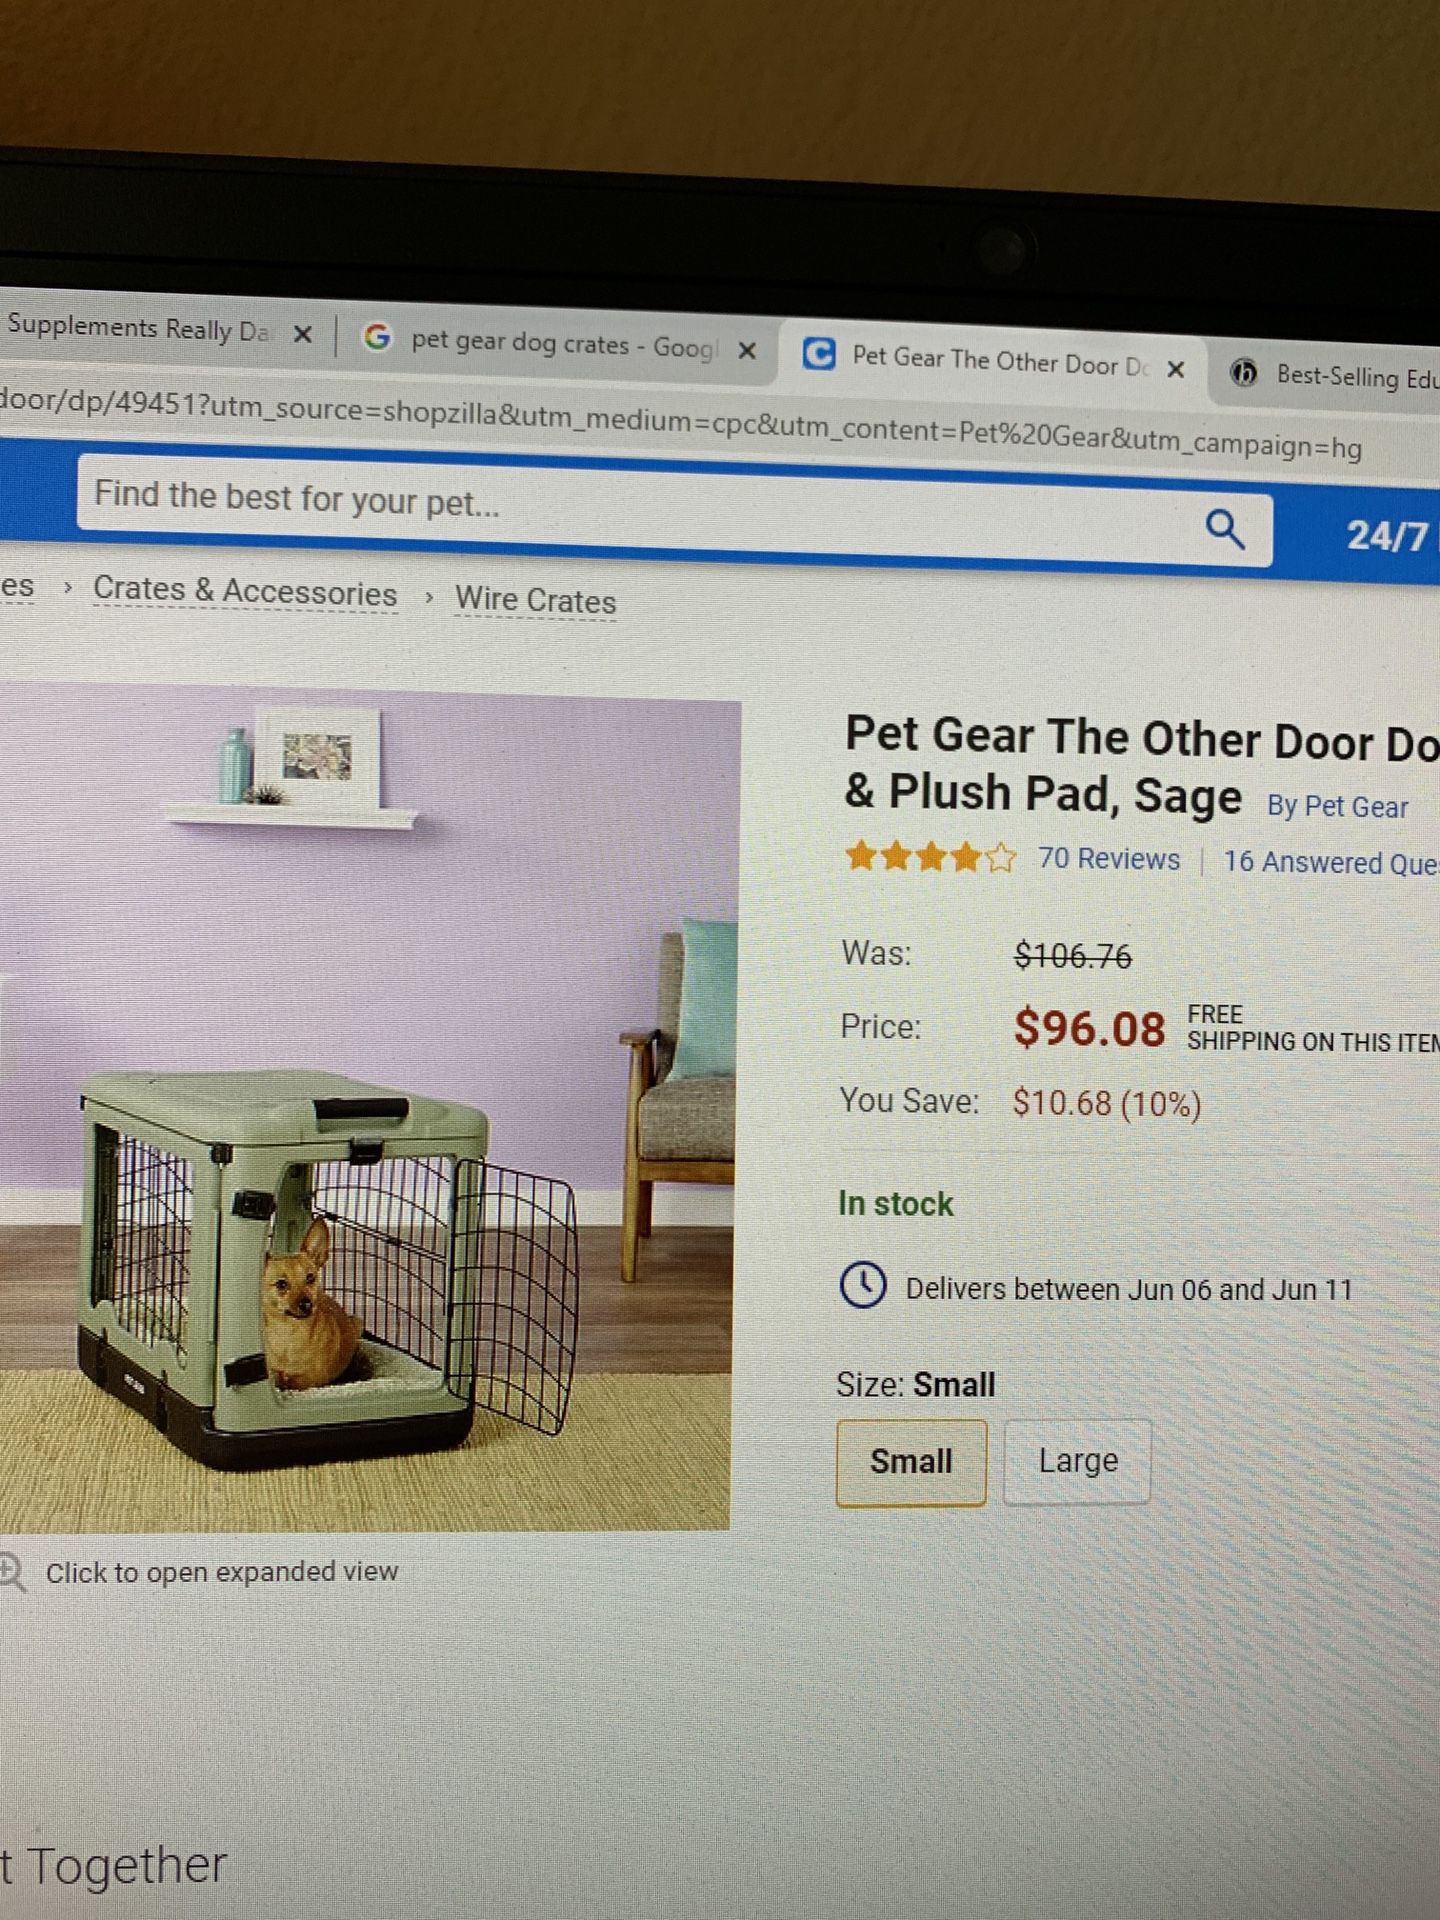 Dog crate up to 30 lb dogs